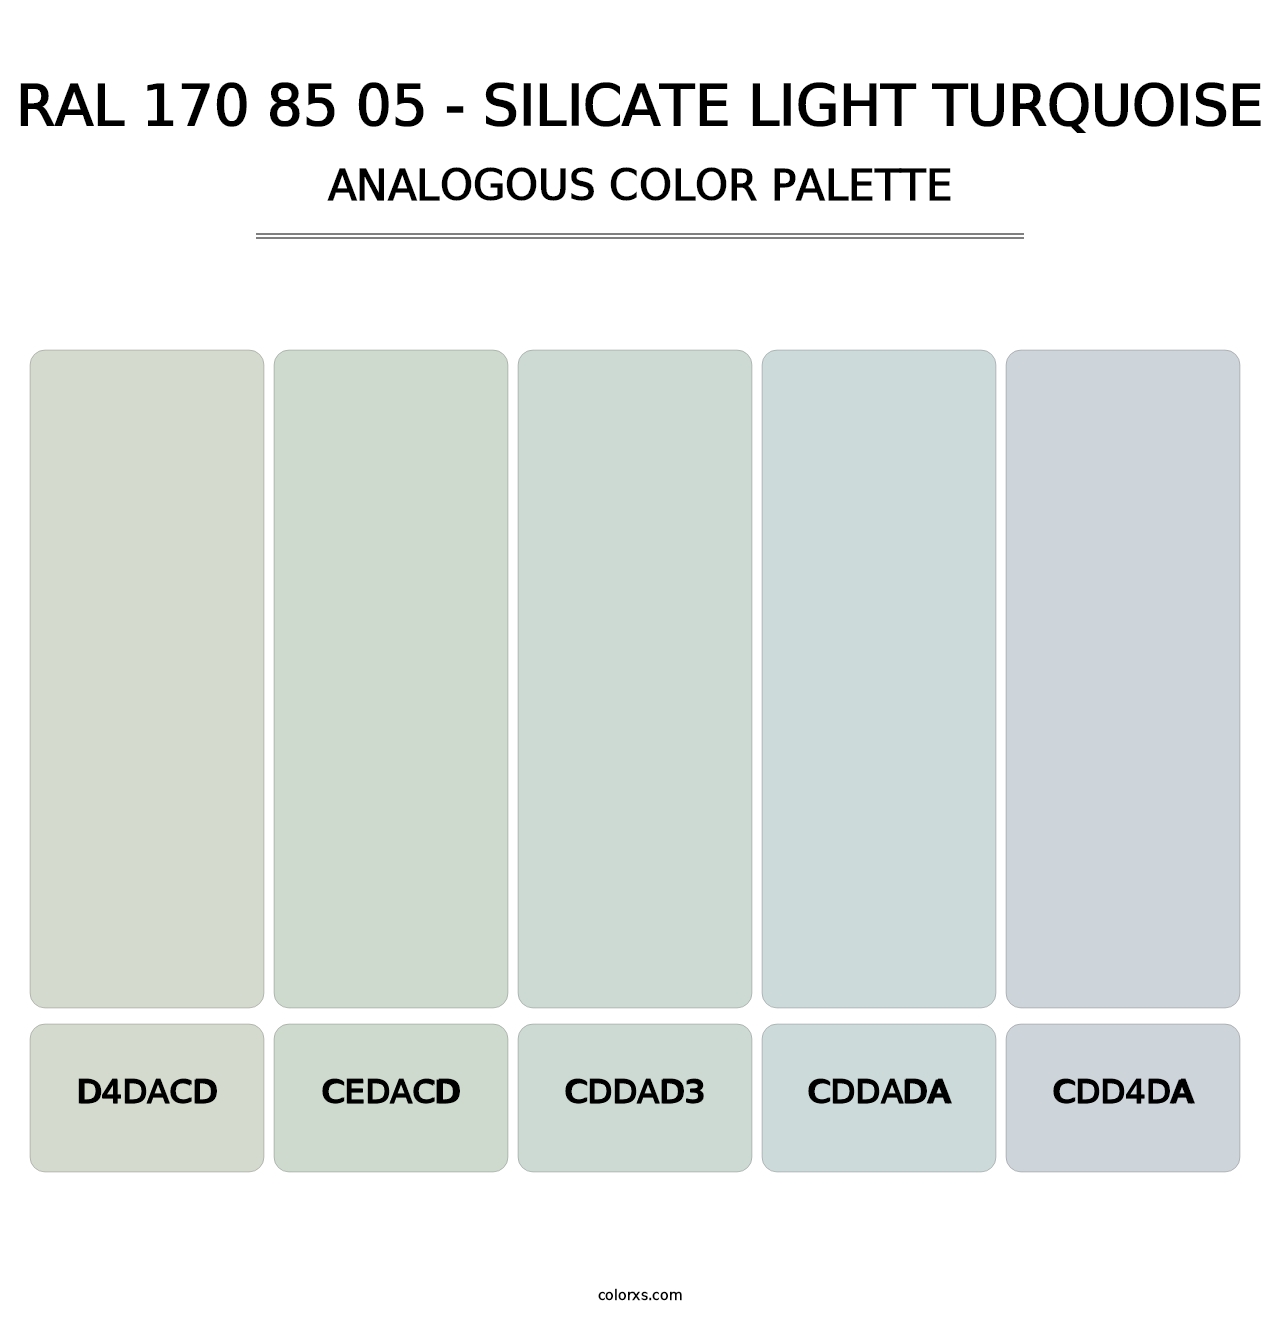 RAL 170 85 05 - Silicate Light Turquoise - Analogous Color Palette